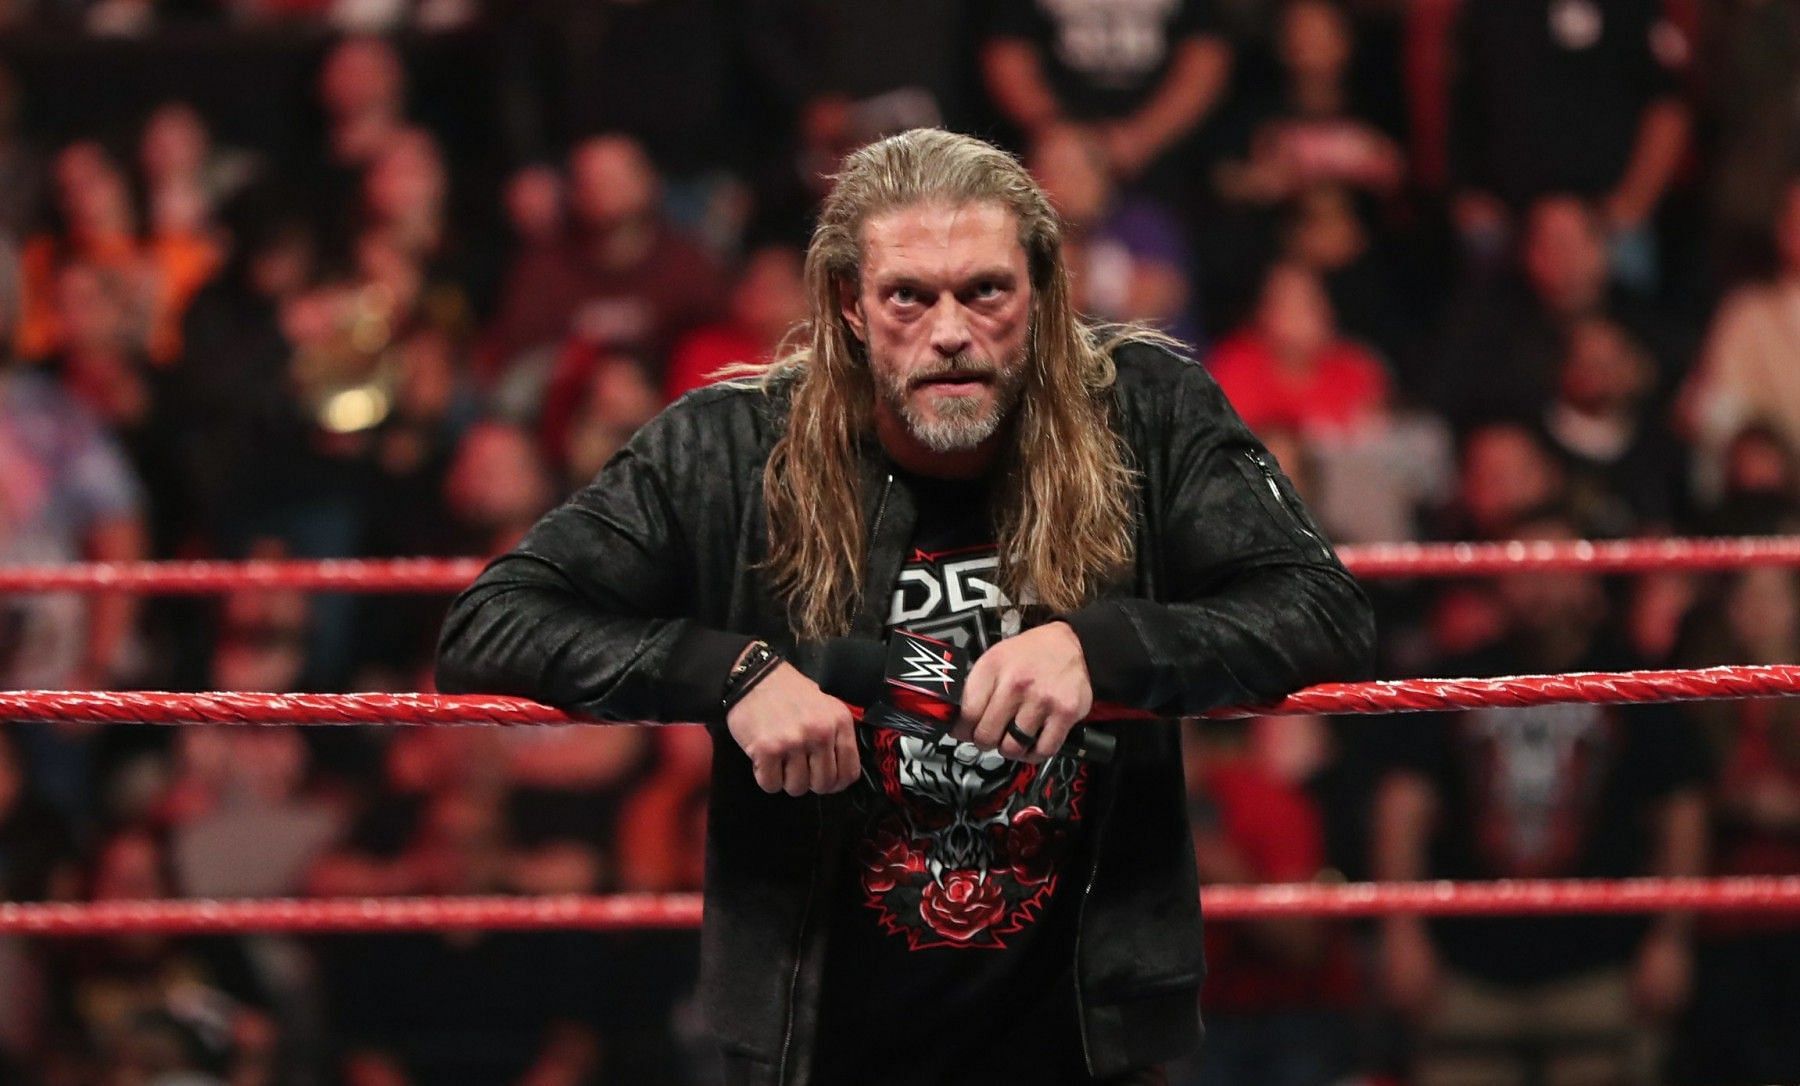 Edge wrestled his last match in WWE recently